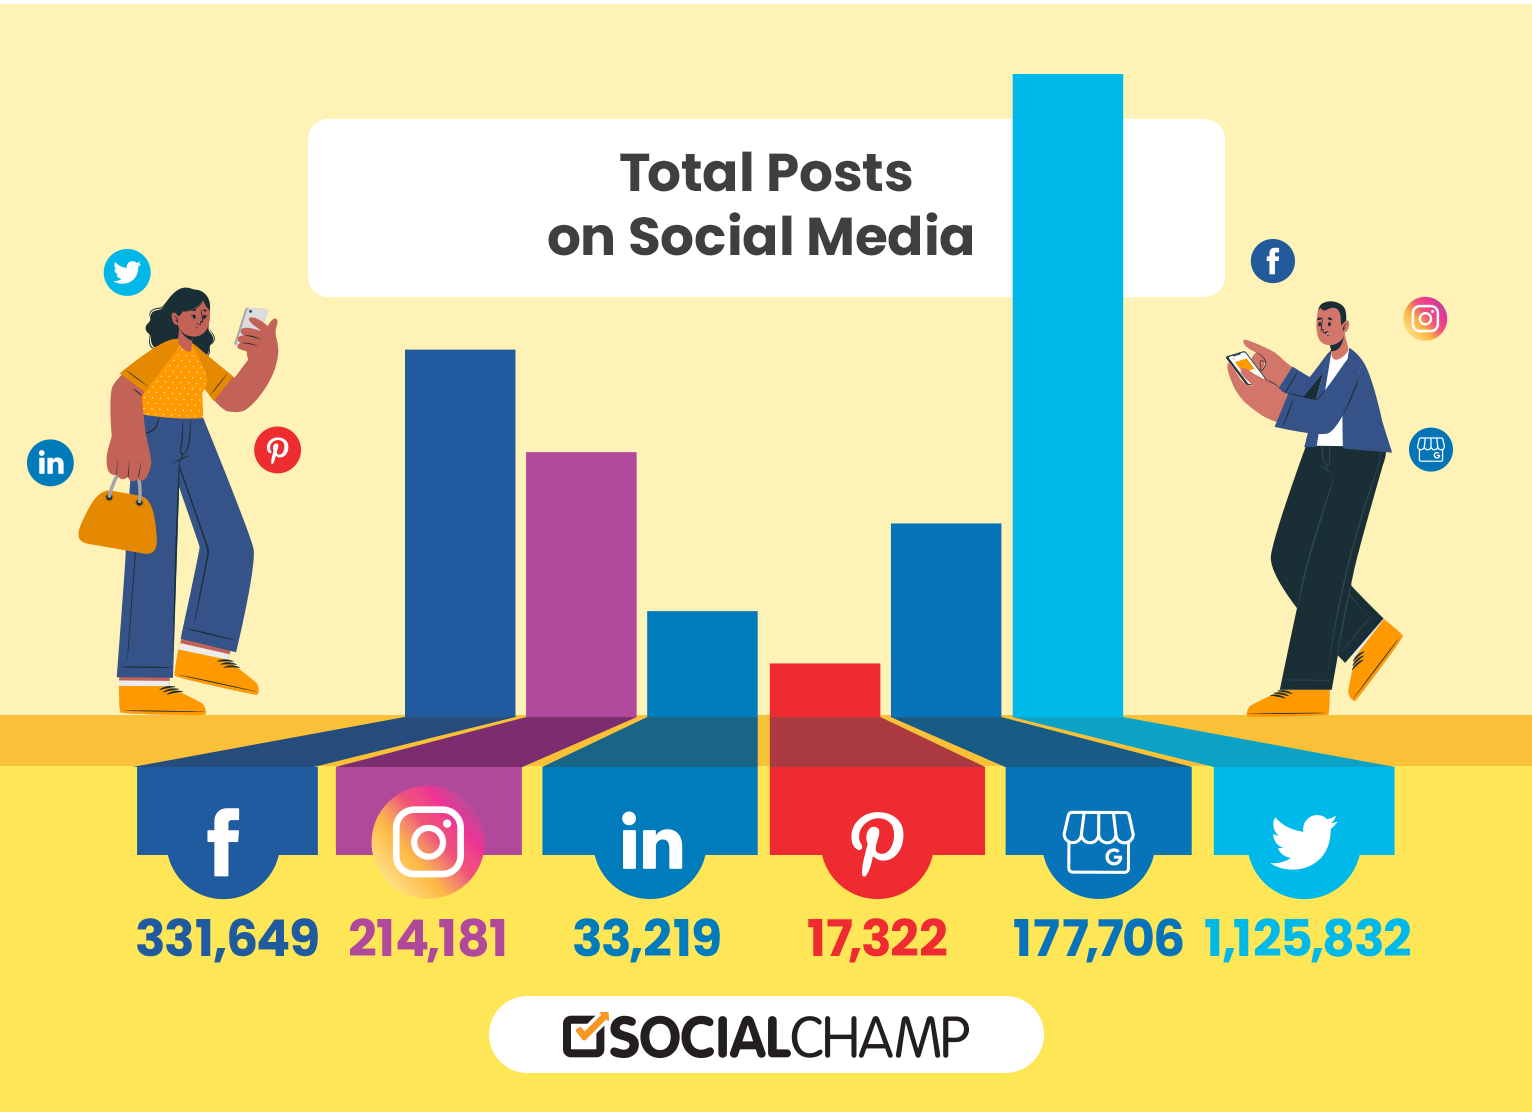 Total posts on social media by Social Champ